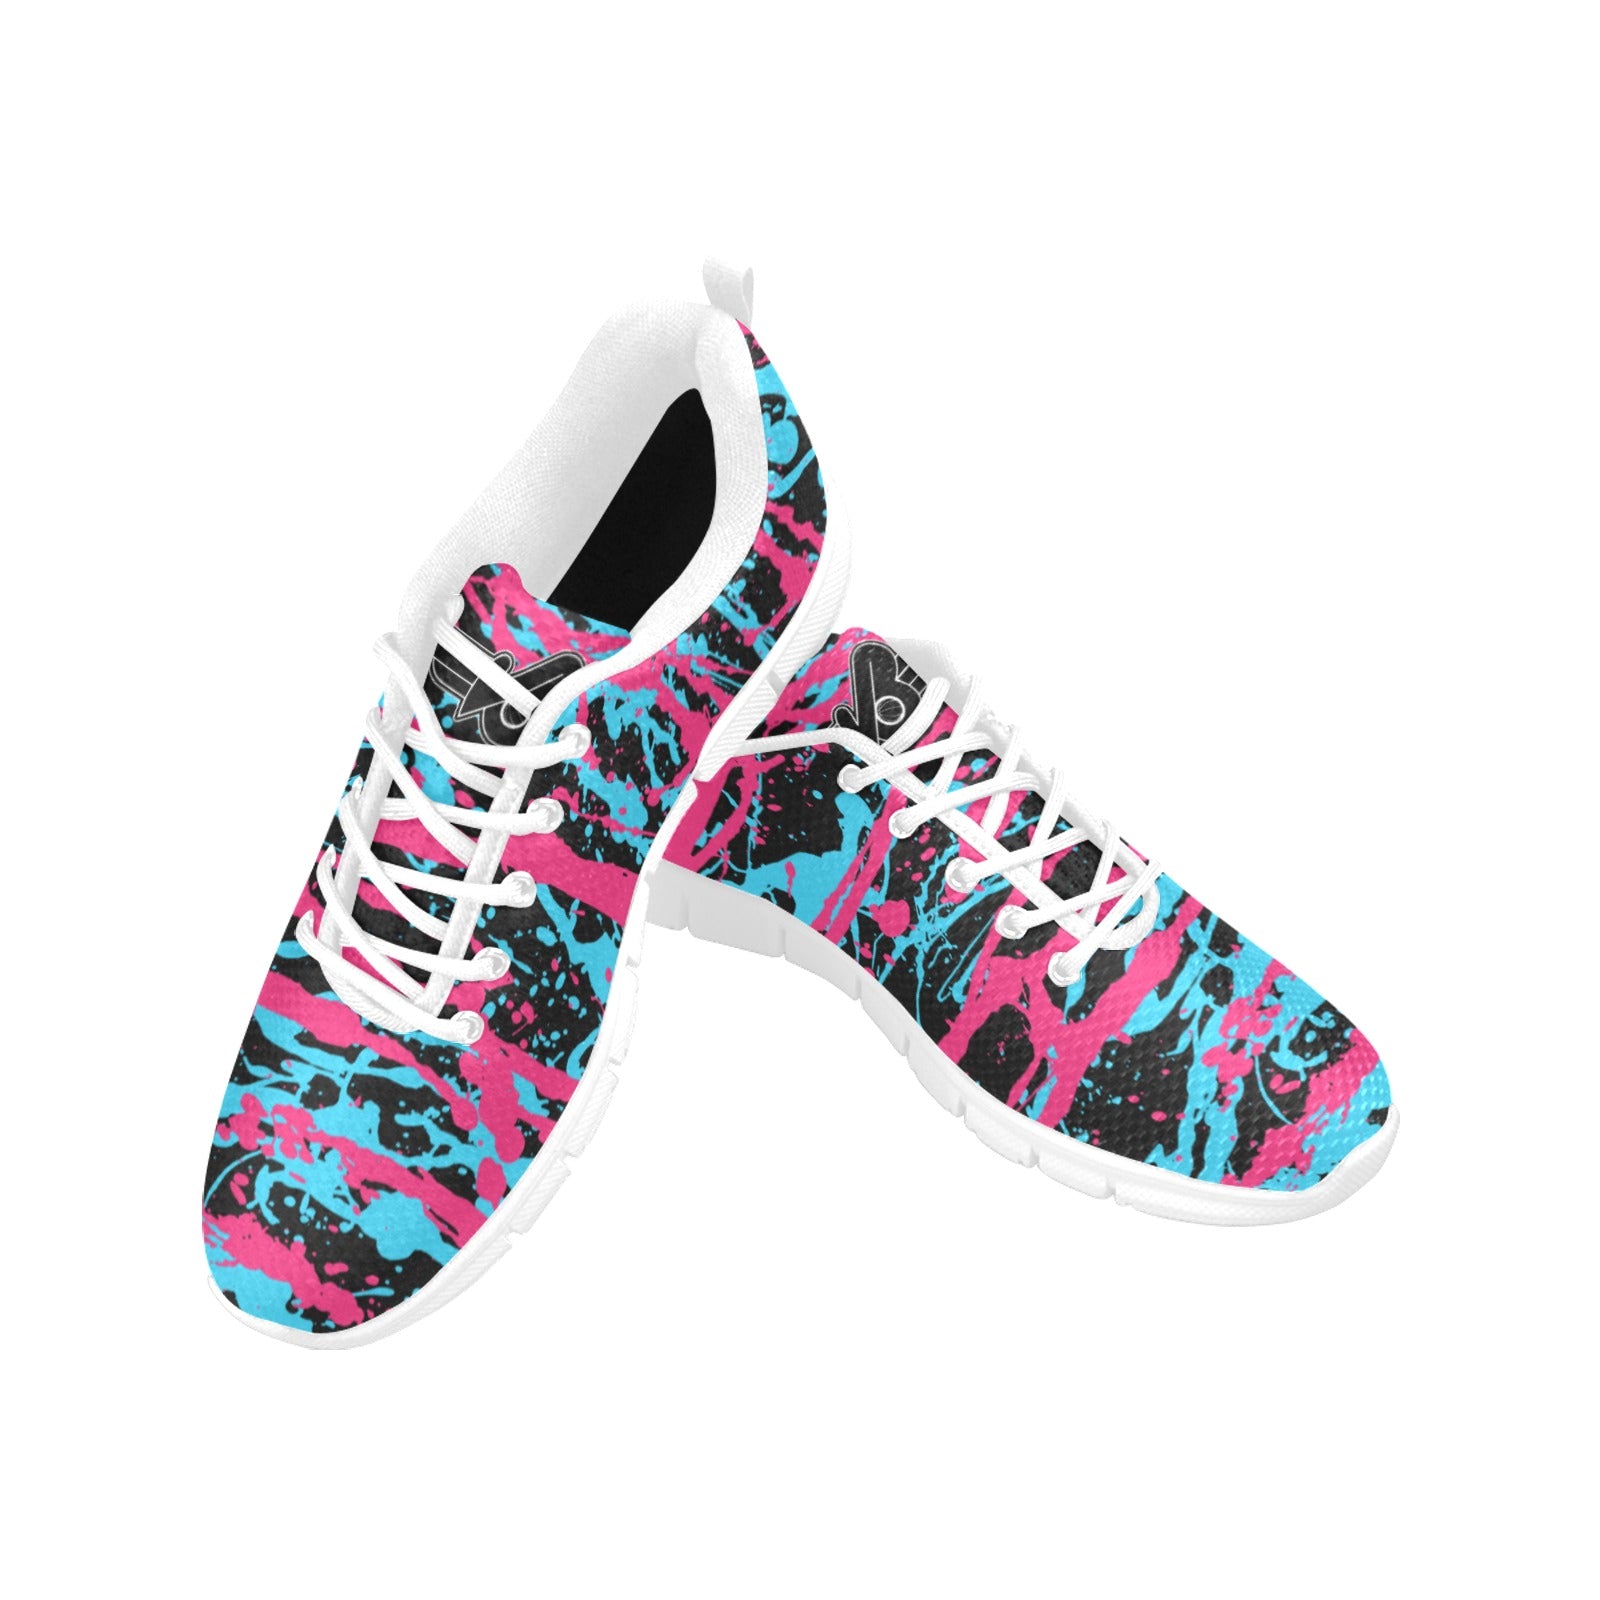 305 SOBE Low-Top Sneakers GYM patent leather online shopping 